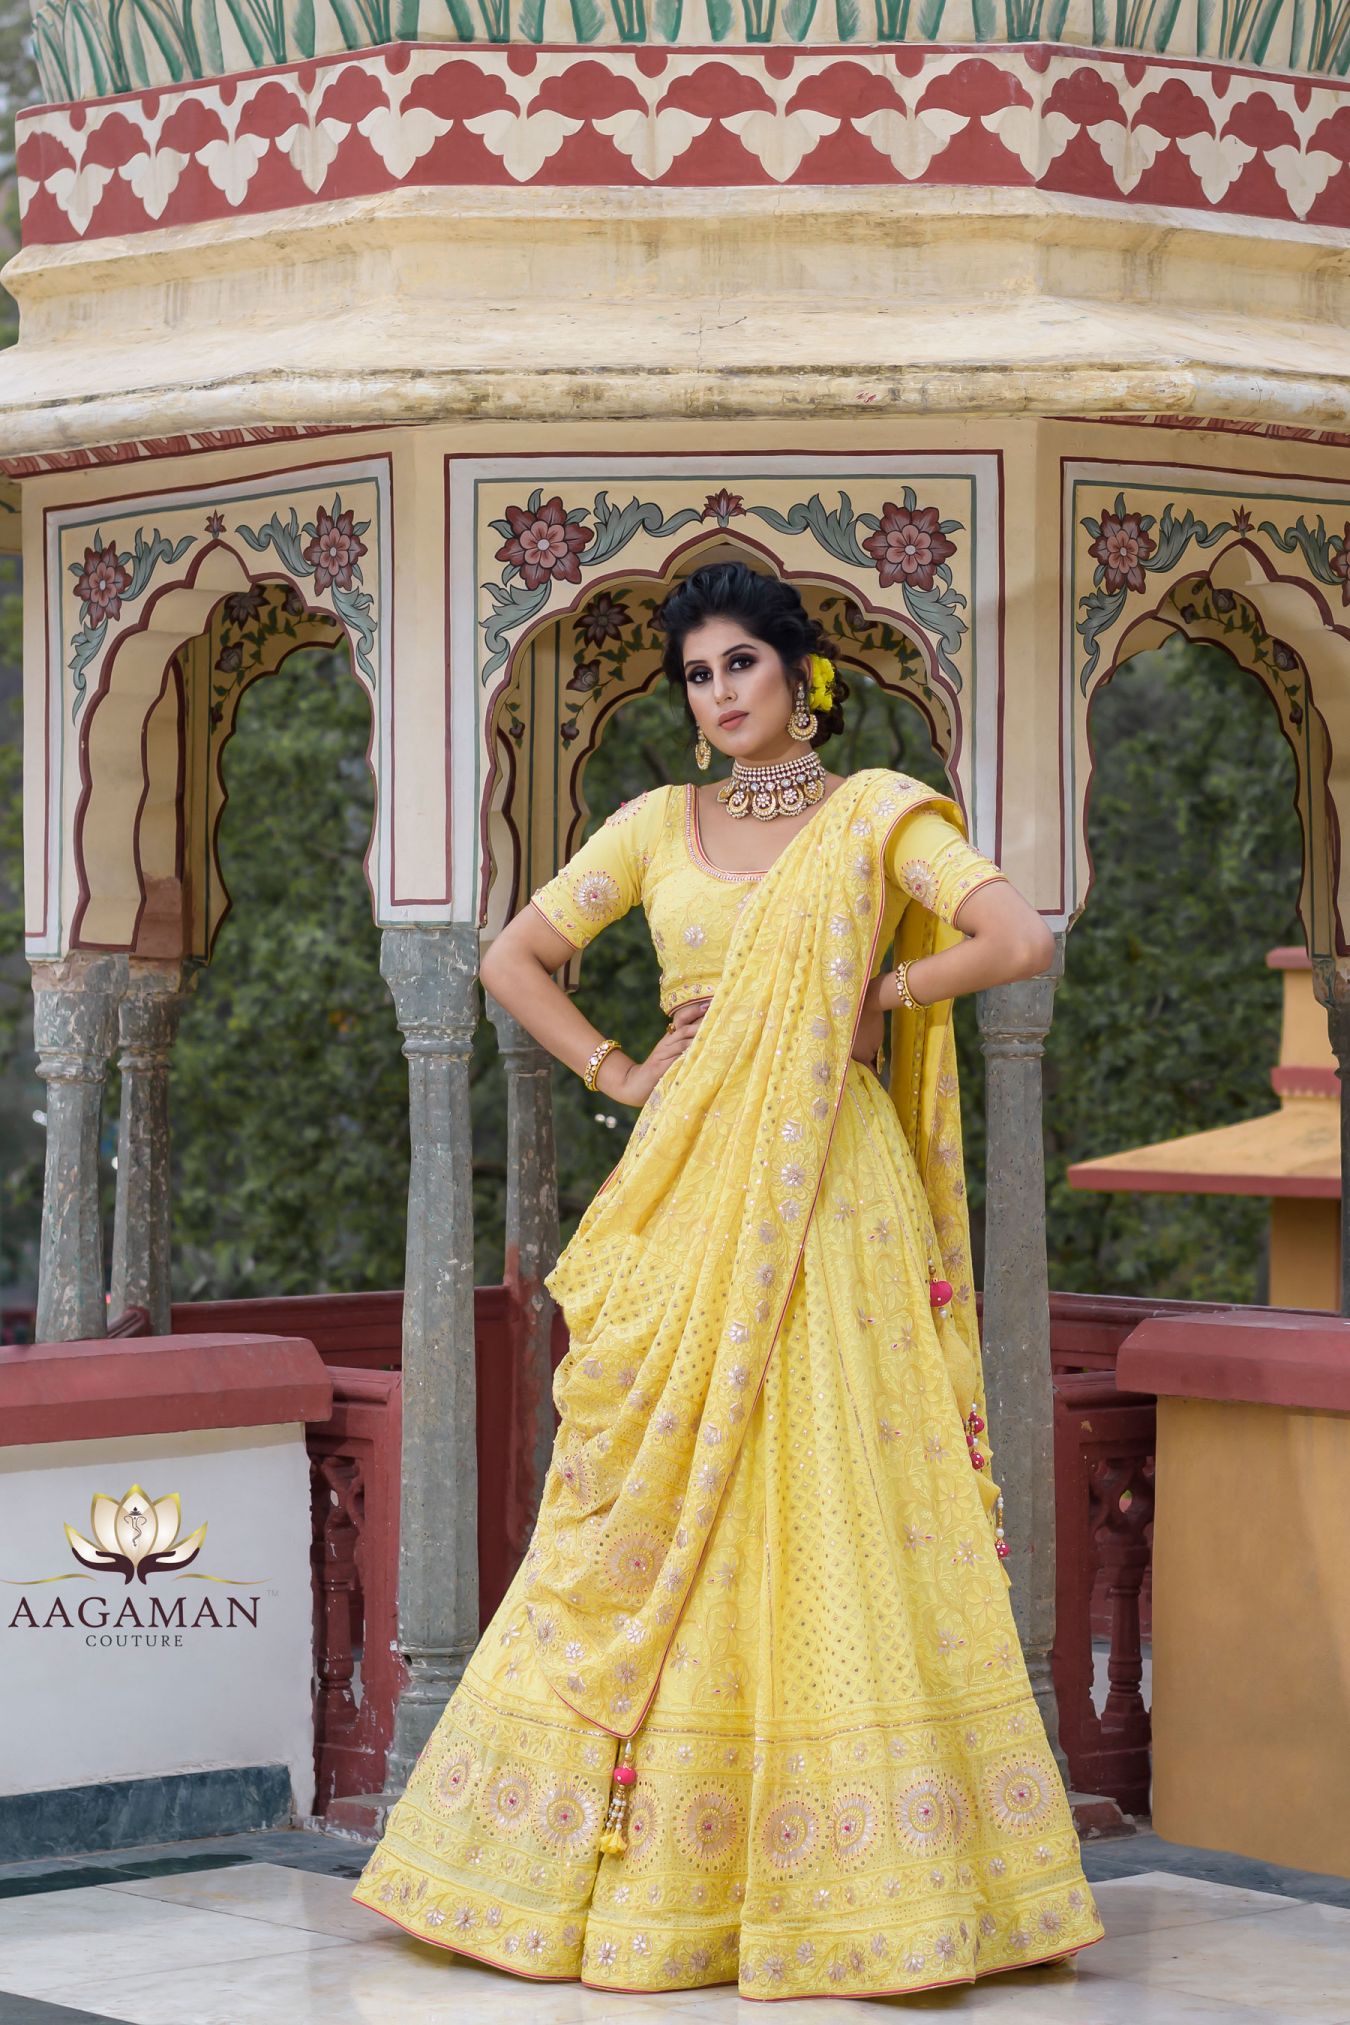 Every Mukaish and Zardozi Piece Come Together to Create this Breathtaking Royal Bridal Handcrafted Chikan Lehenga in Vivid Romantic Yellow